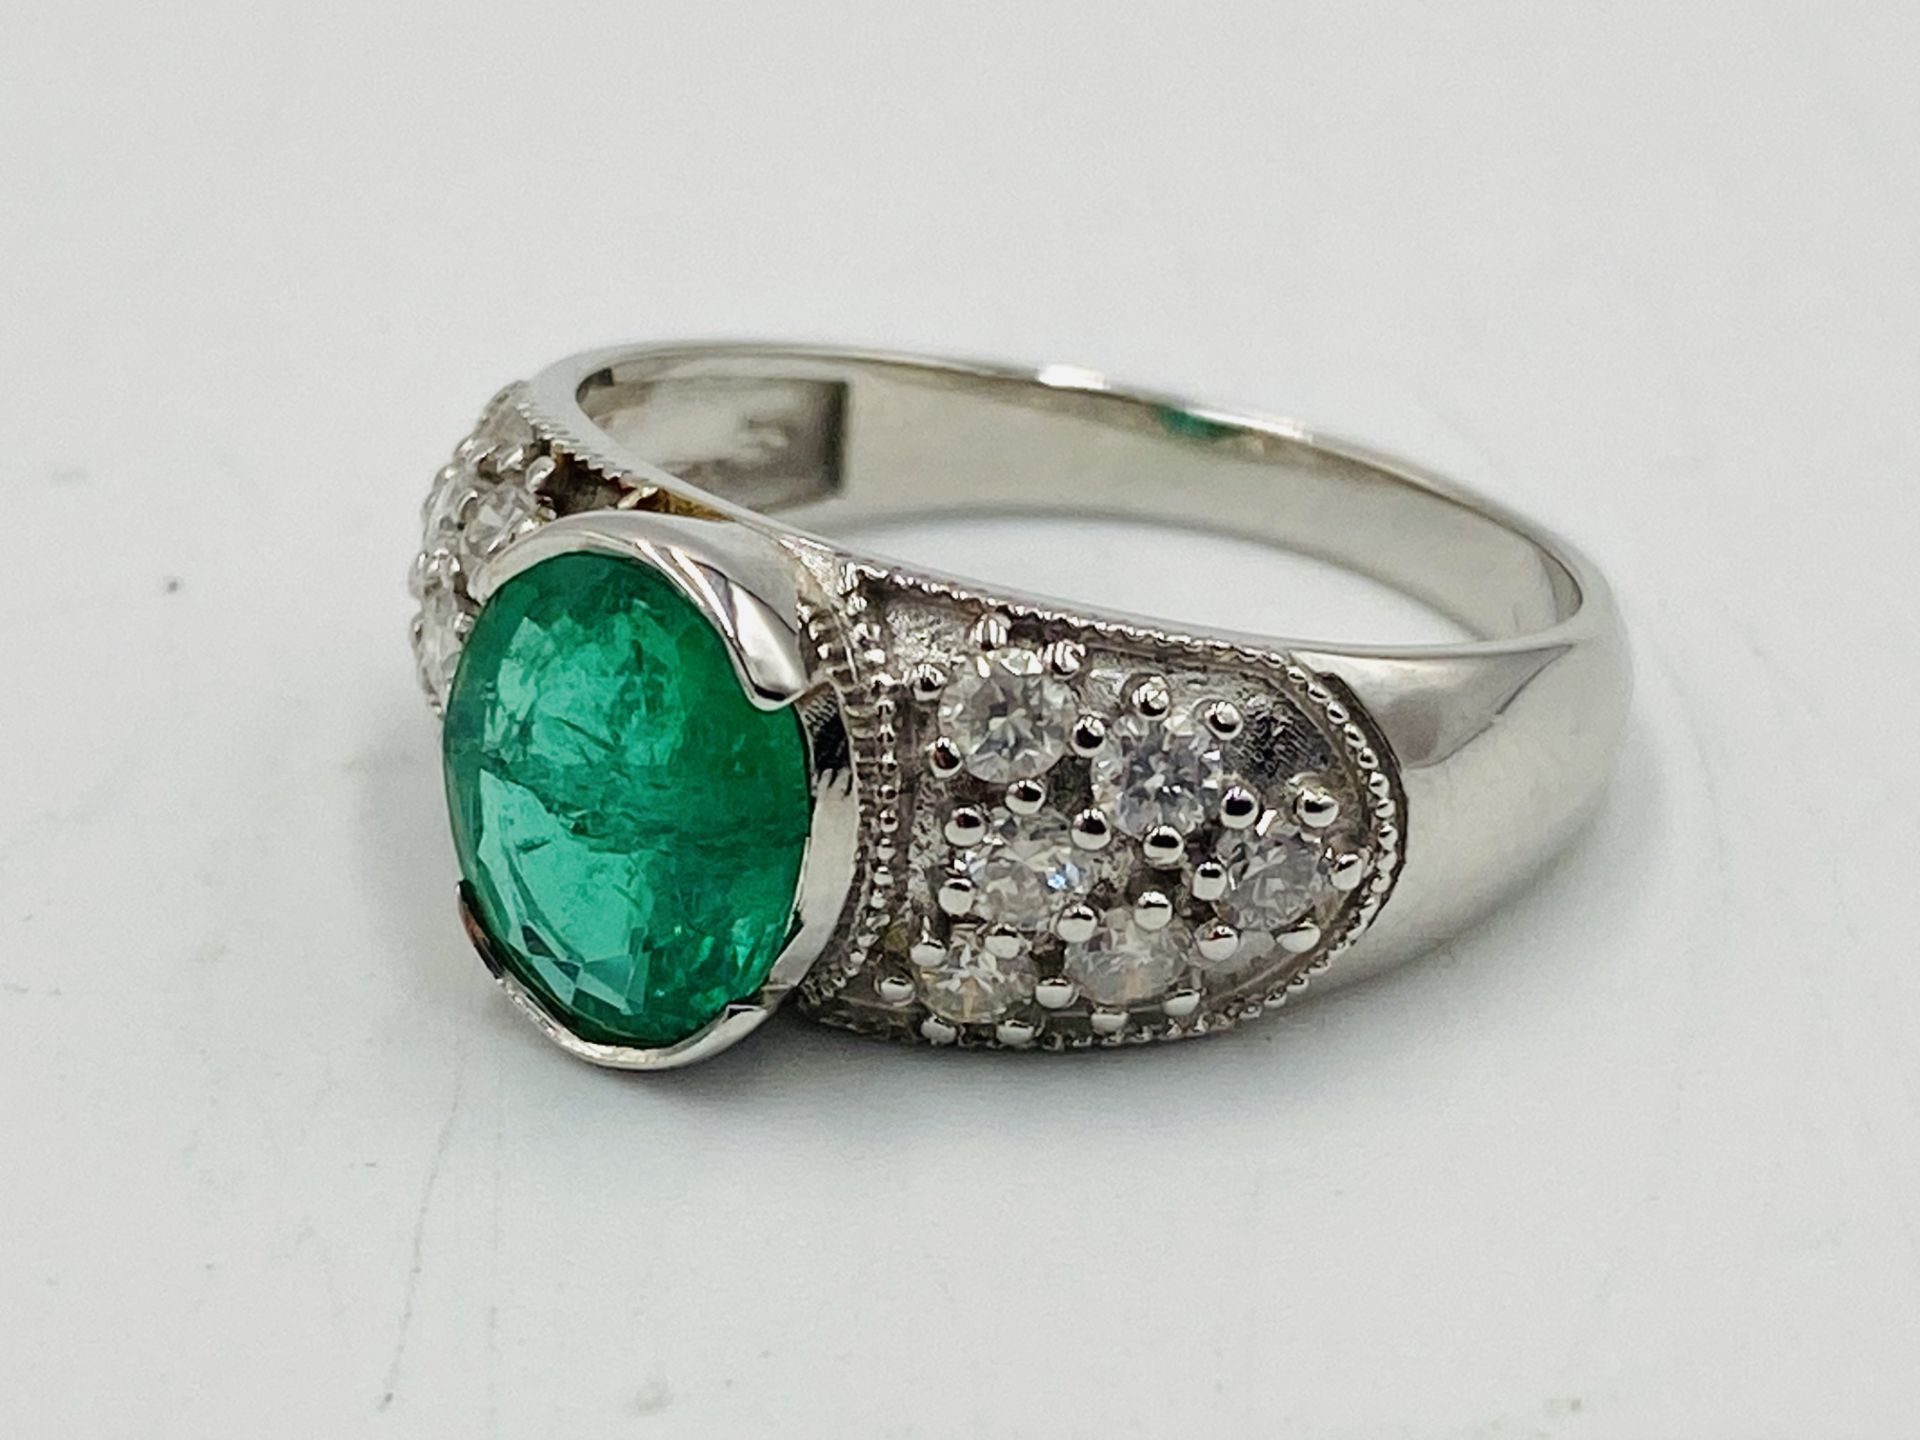 18ct white gold, diamond and emerald ring - Image 3 of 4